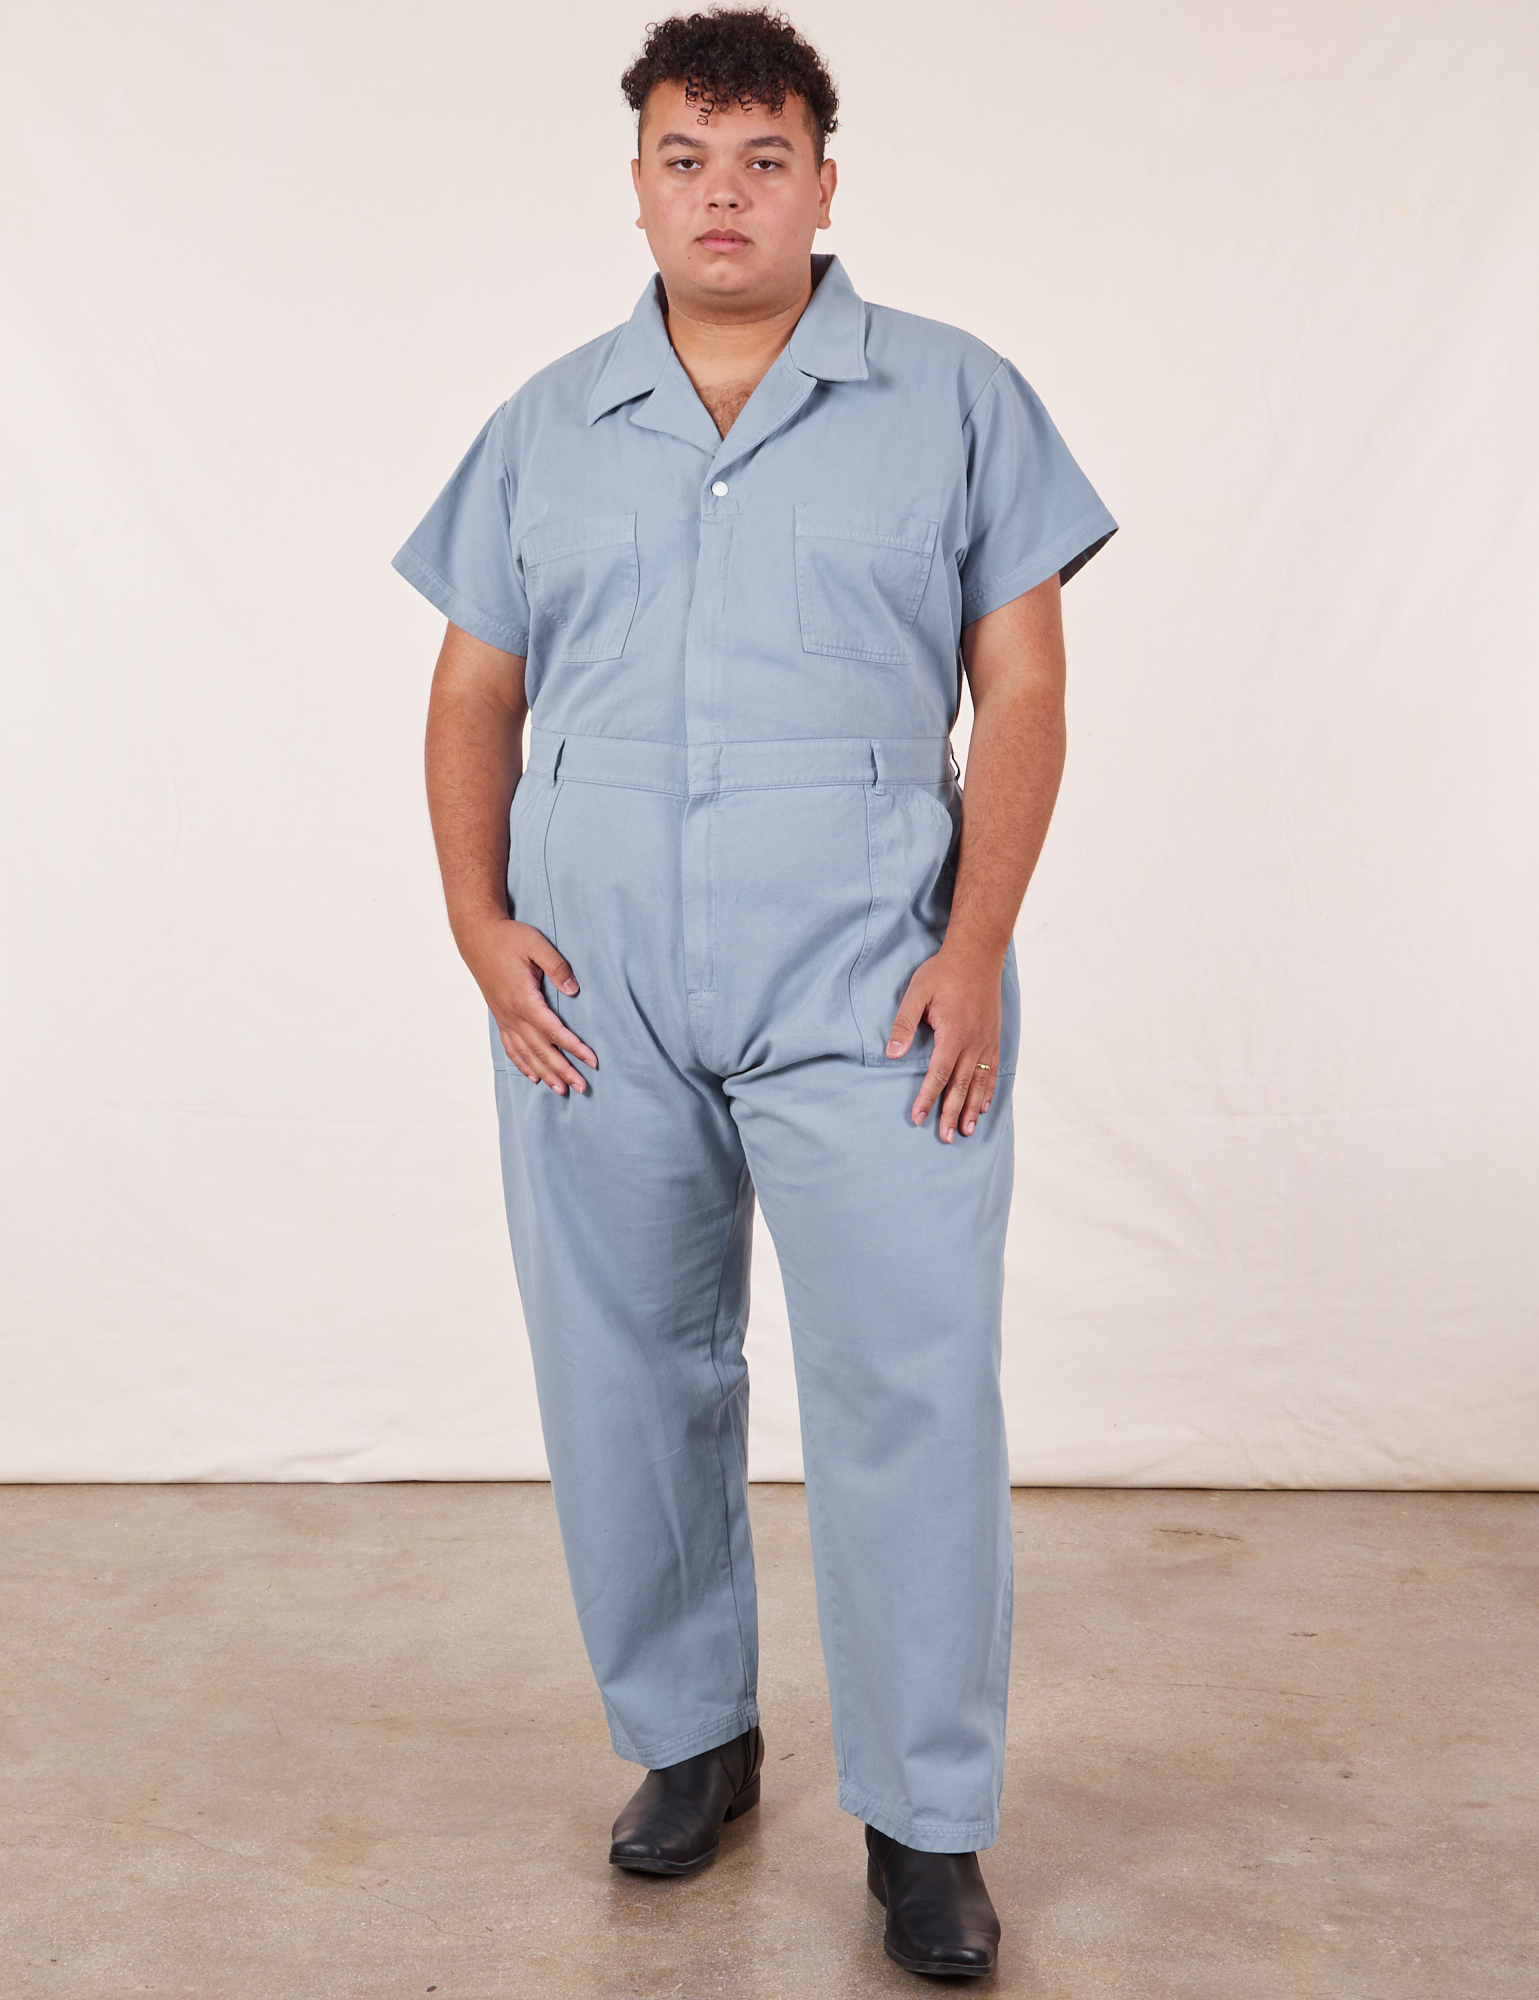 Miguel 6&#39;0&quot; is and wearing 2XL Short Sleeve Jumpsuit in Periwinkle